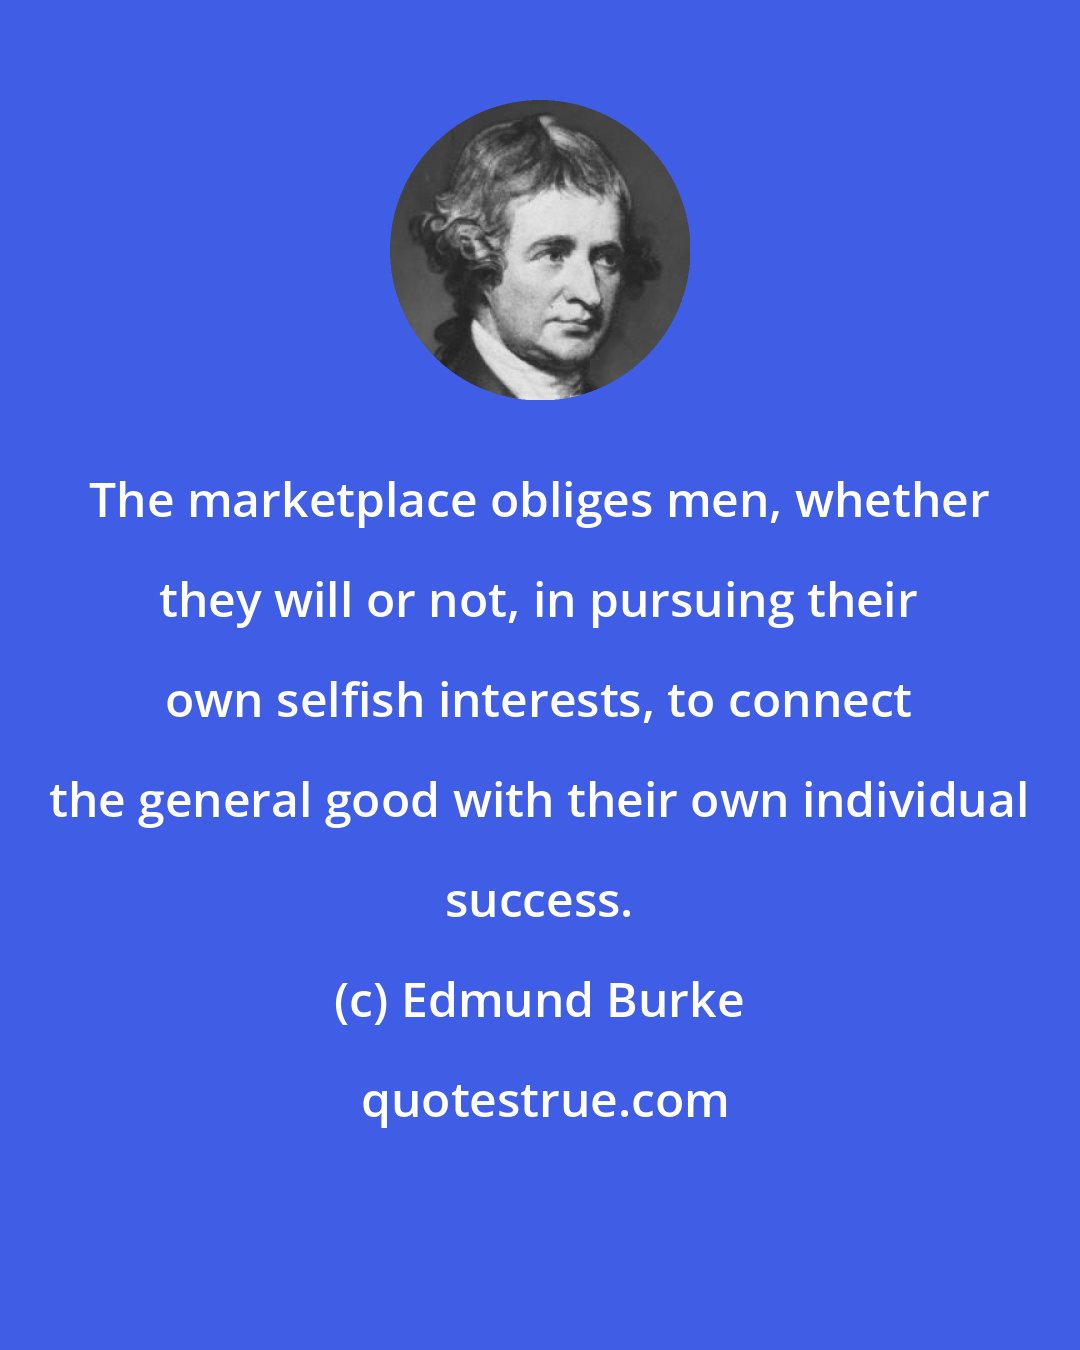 Edmund Burke: The marketplace obliges men, whether they will or not, in pursuing their own selfish interests, to connect the general good with their own individual success.